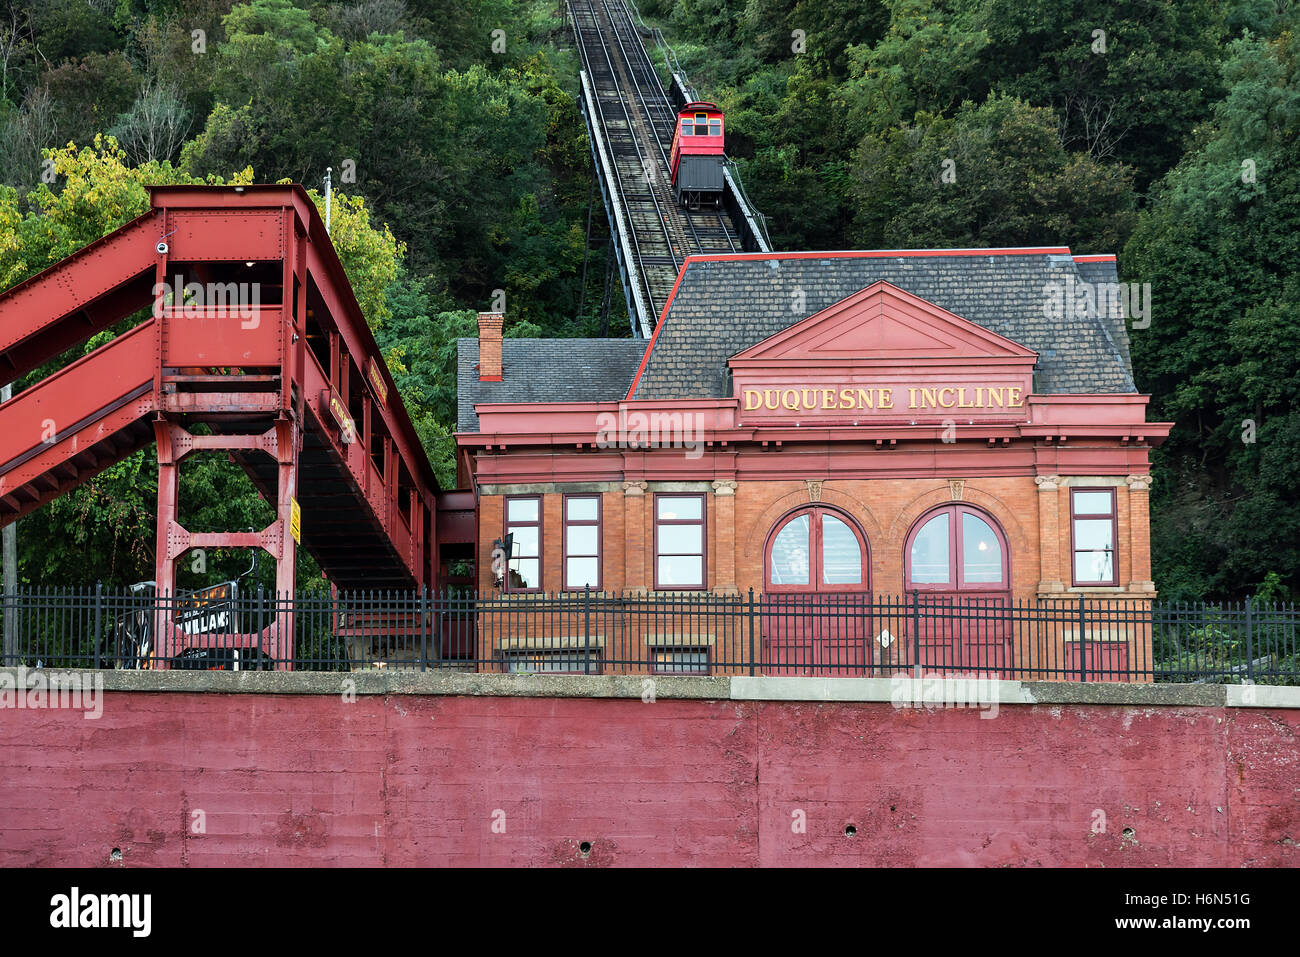 Duquesne Incline, Pittsburgh, Pennsylvanie, USA. Banque D'Images